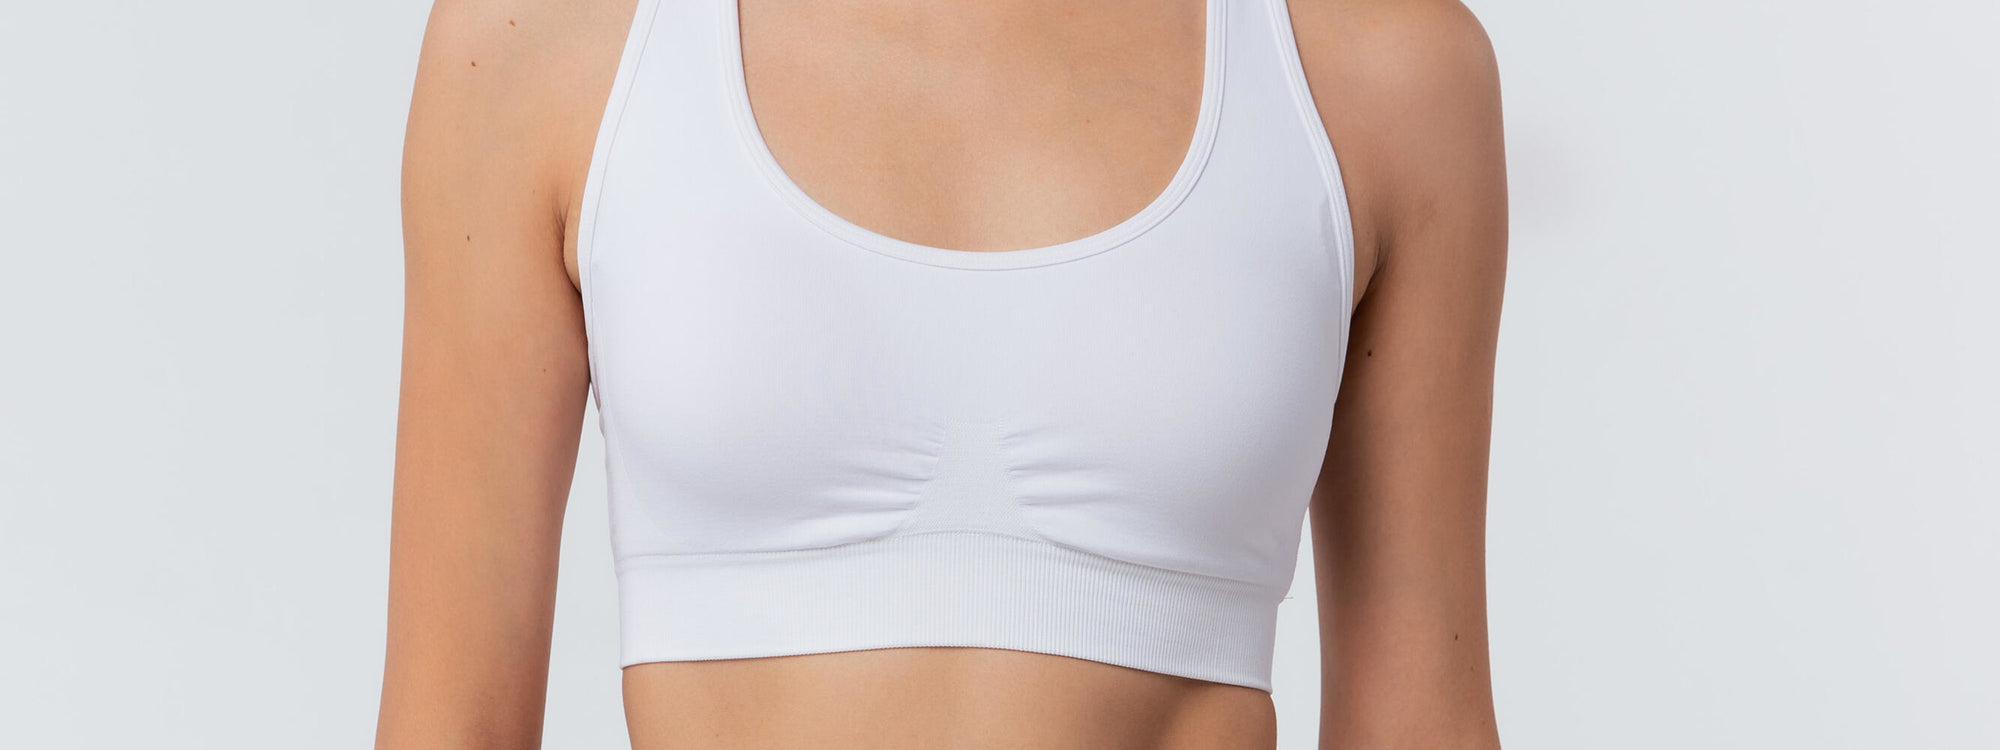 How to Choose Your Sports Bra